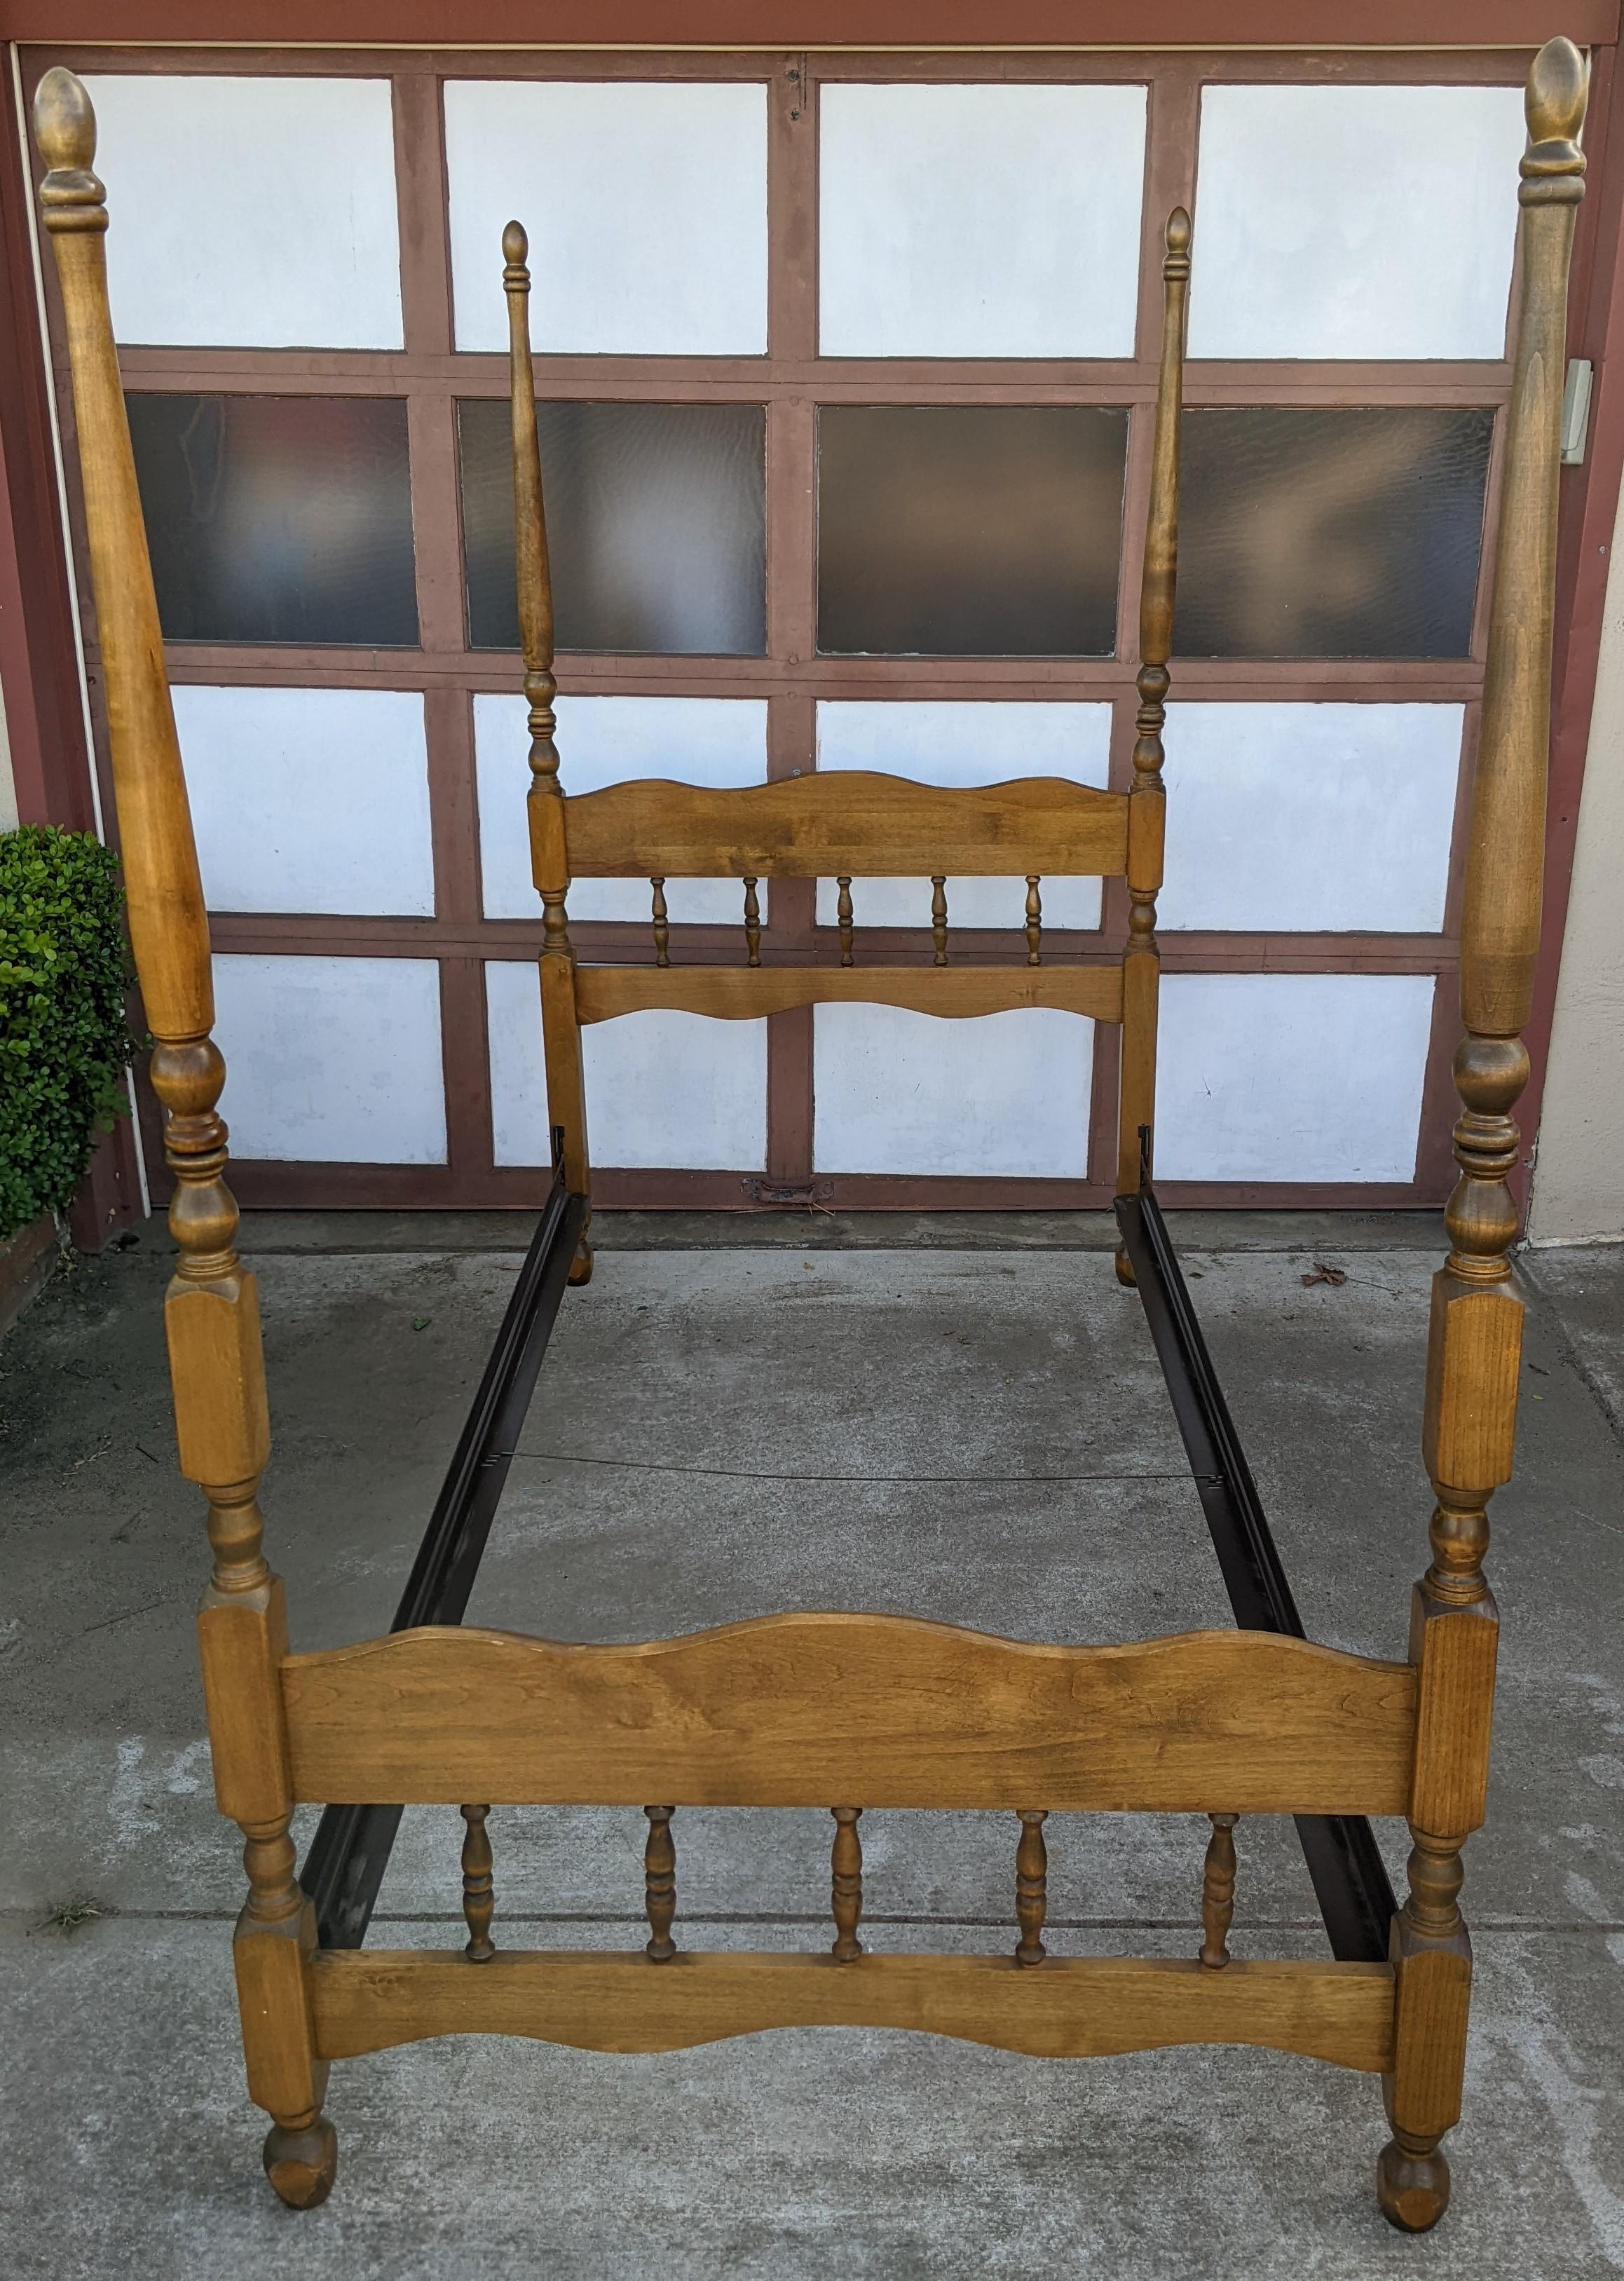 This vintage colonial style four poster bedframe is just the thing for your small person's room. They'll feel cozy and safely ensconced in this lovely four poster bed, made of (presumably) maple. Easy to fit into a cottagecore or granny core